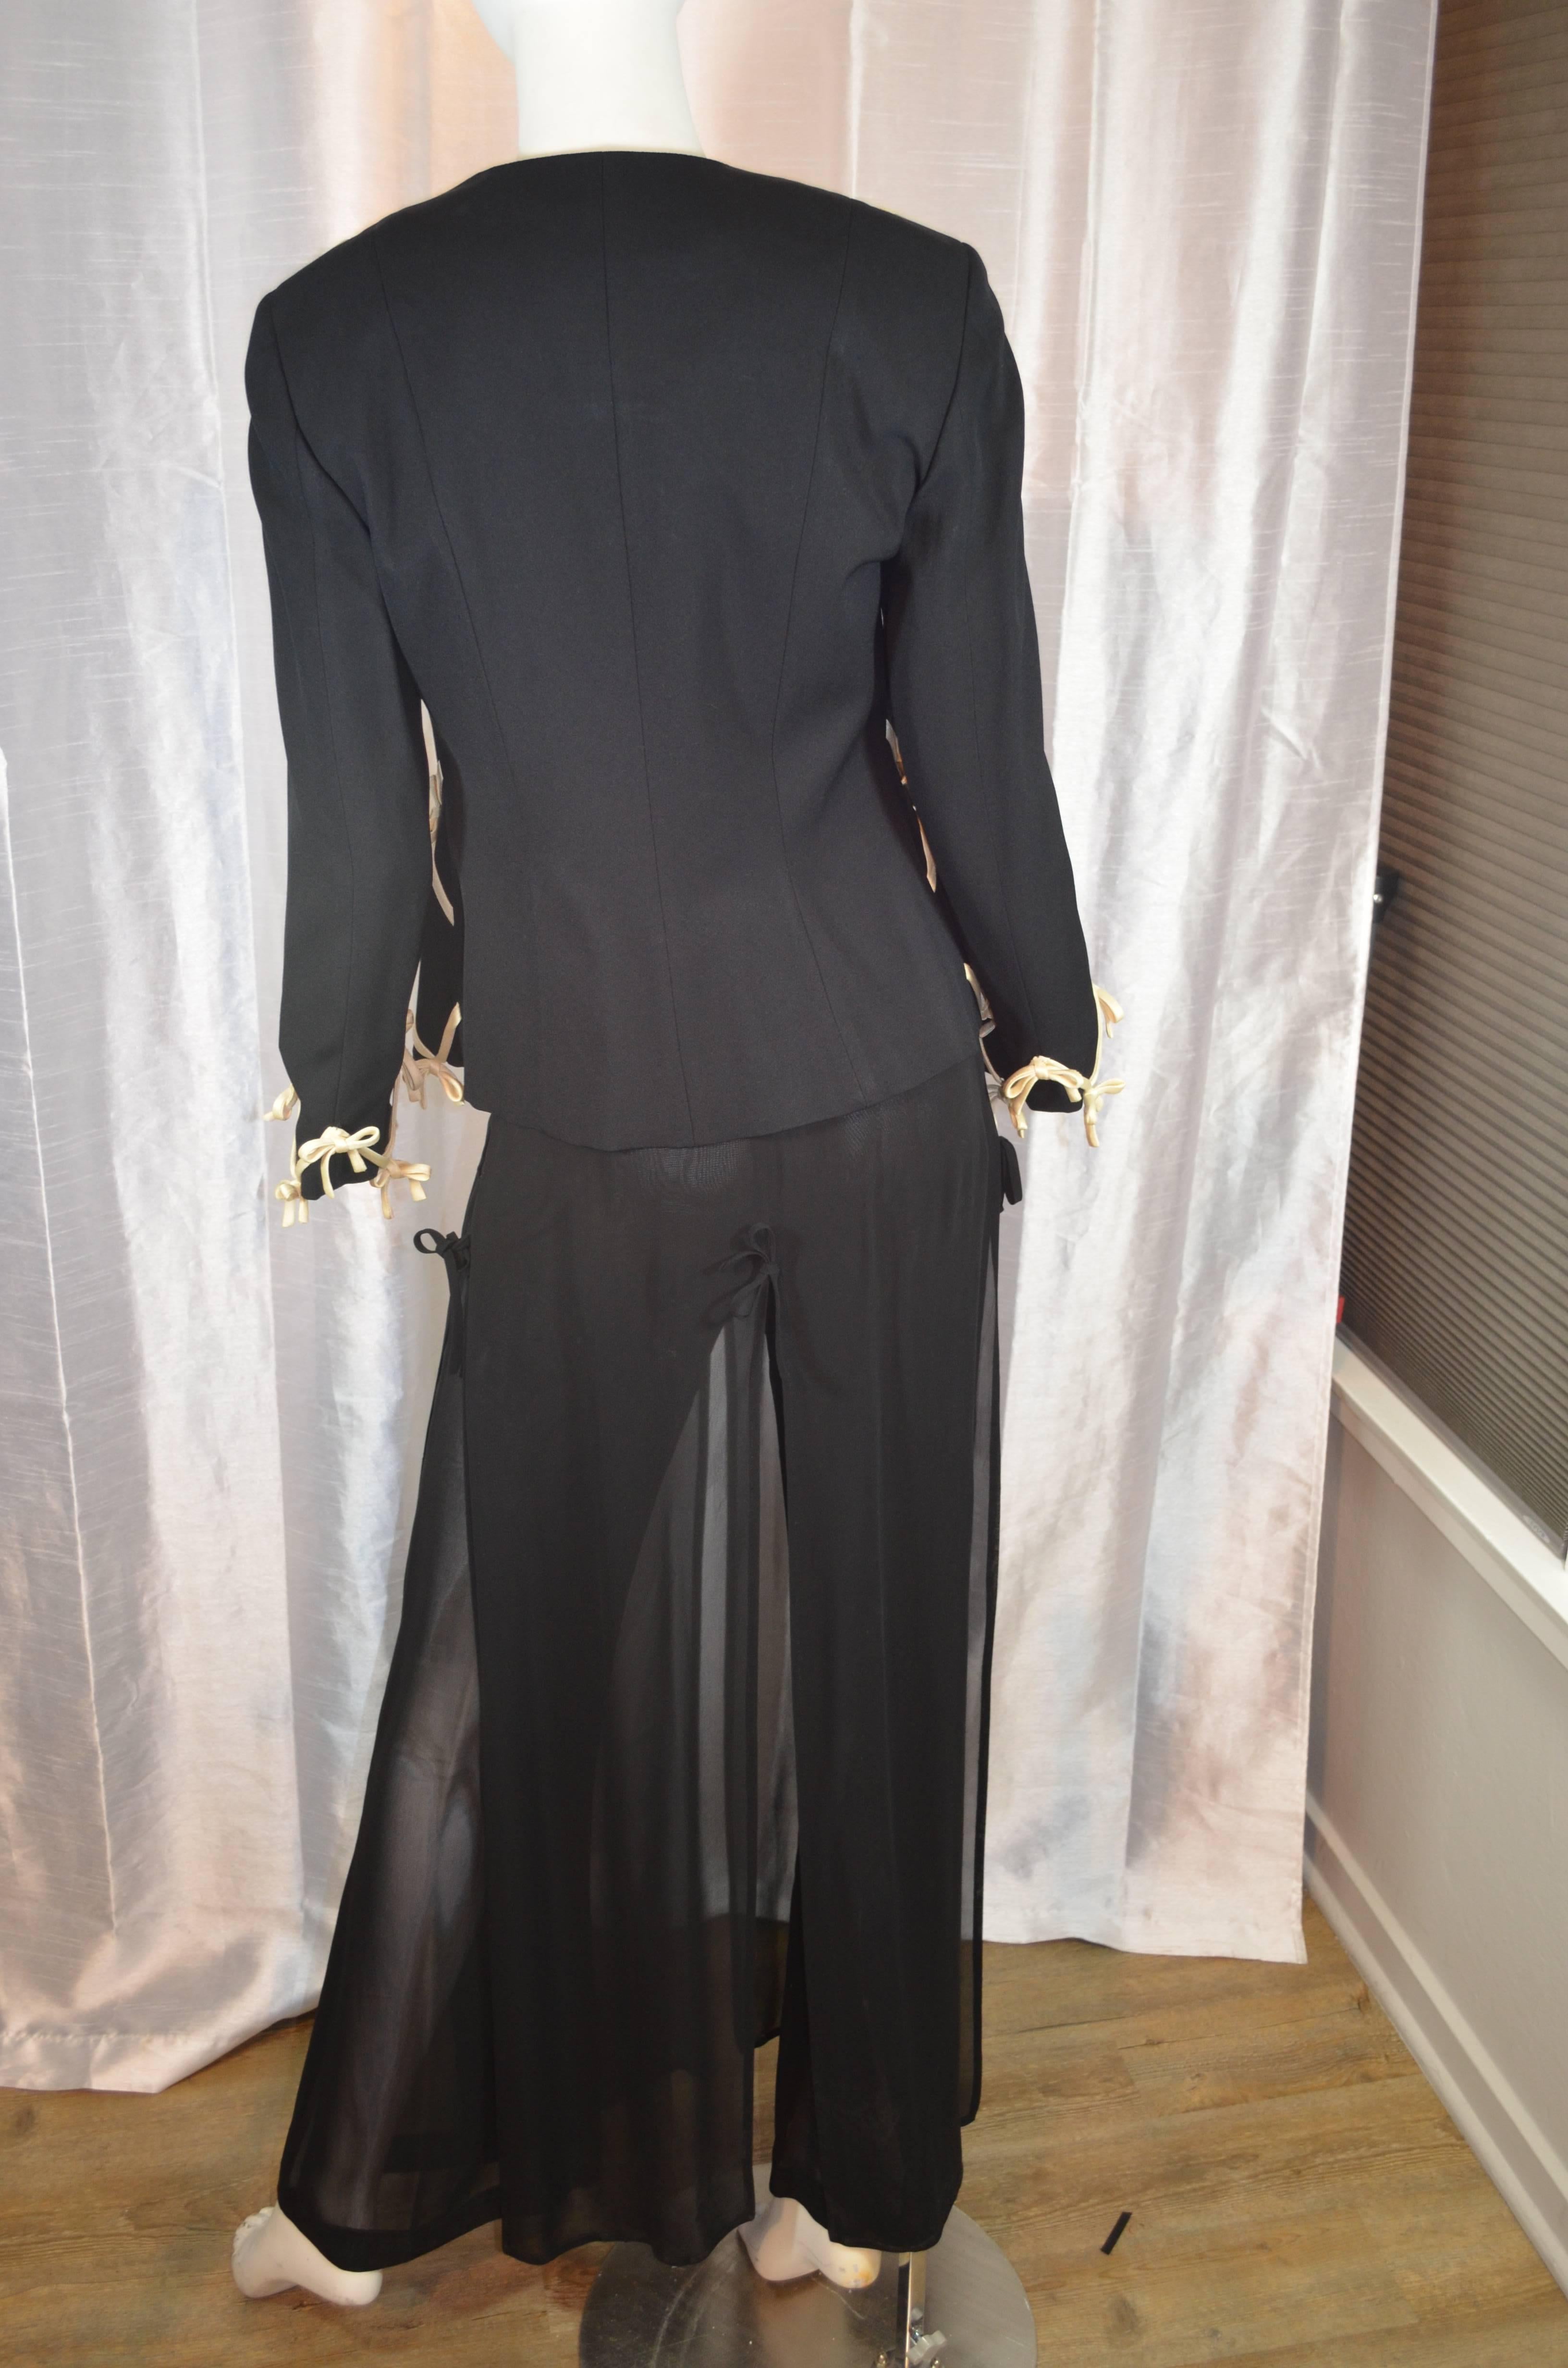 Moschino Cheap and Chic Bow Embellished Pants Suit 4